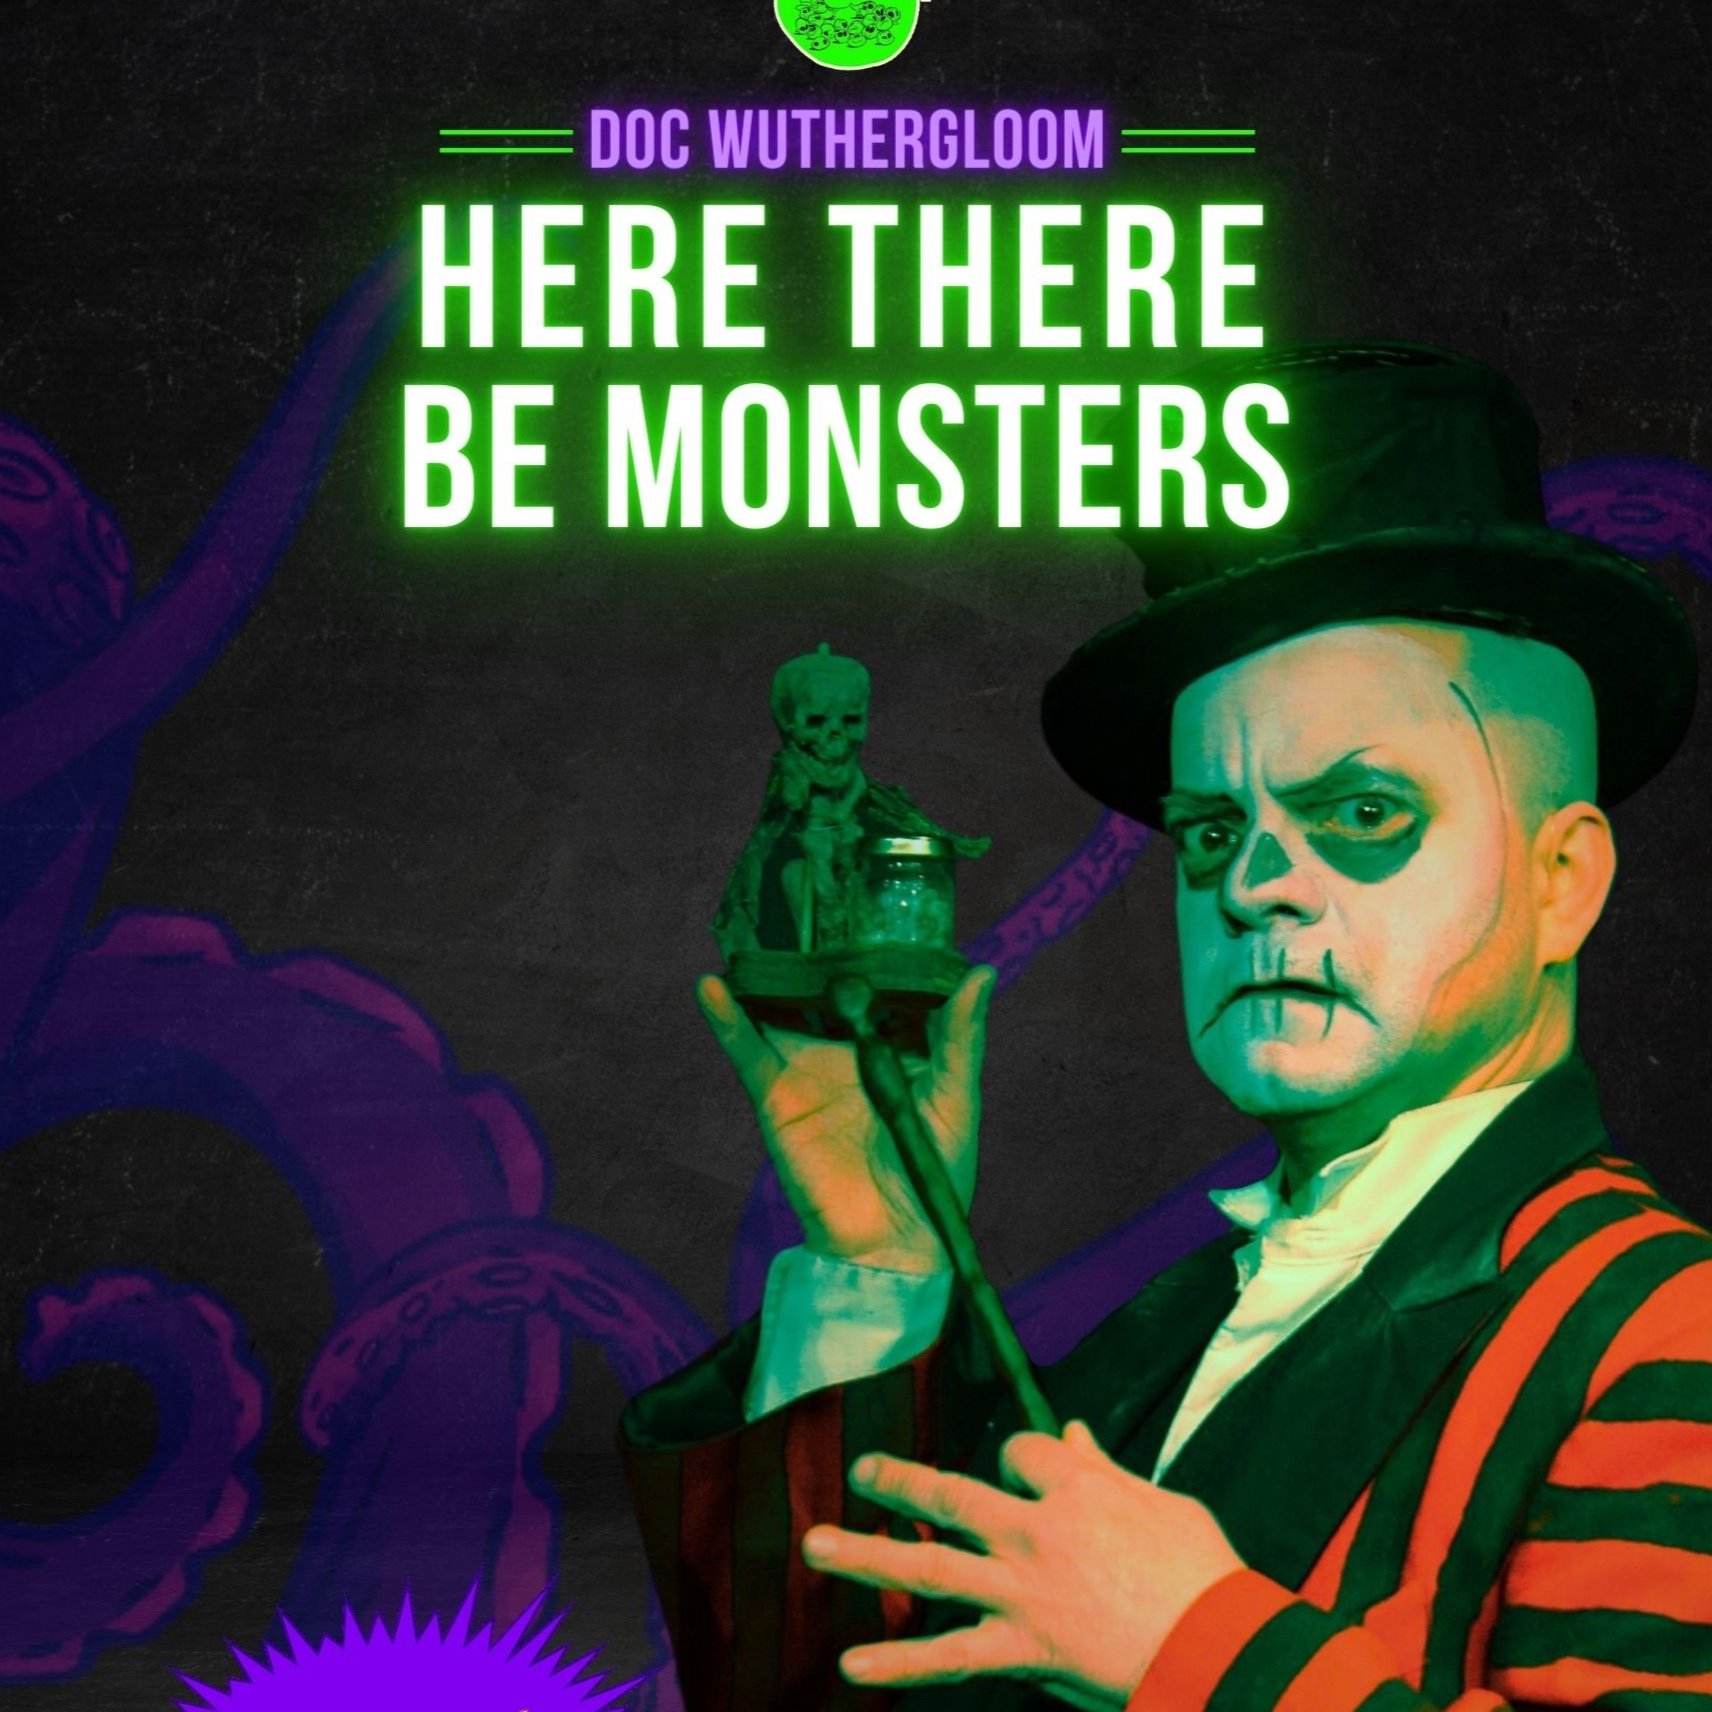 Poster for 'Here there be Monsters' A man in a striped jacket wears a top hat with grimacing face paint on. Text reads: "DOC WUTHERBLOOM HERE THERE BE MONSTERS"